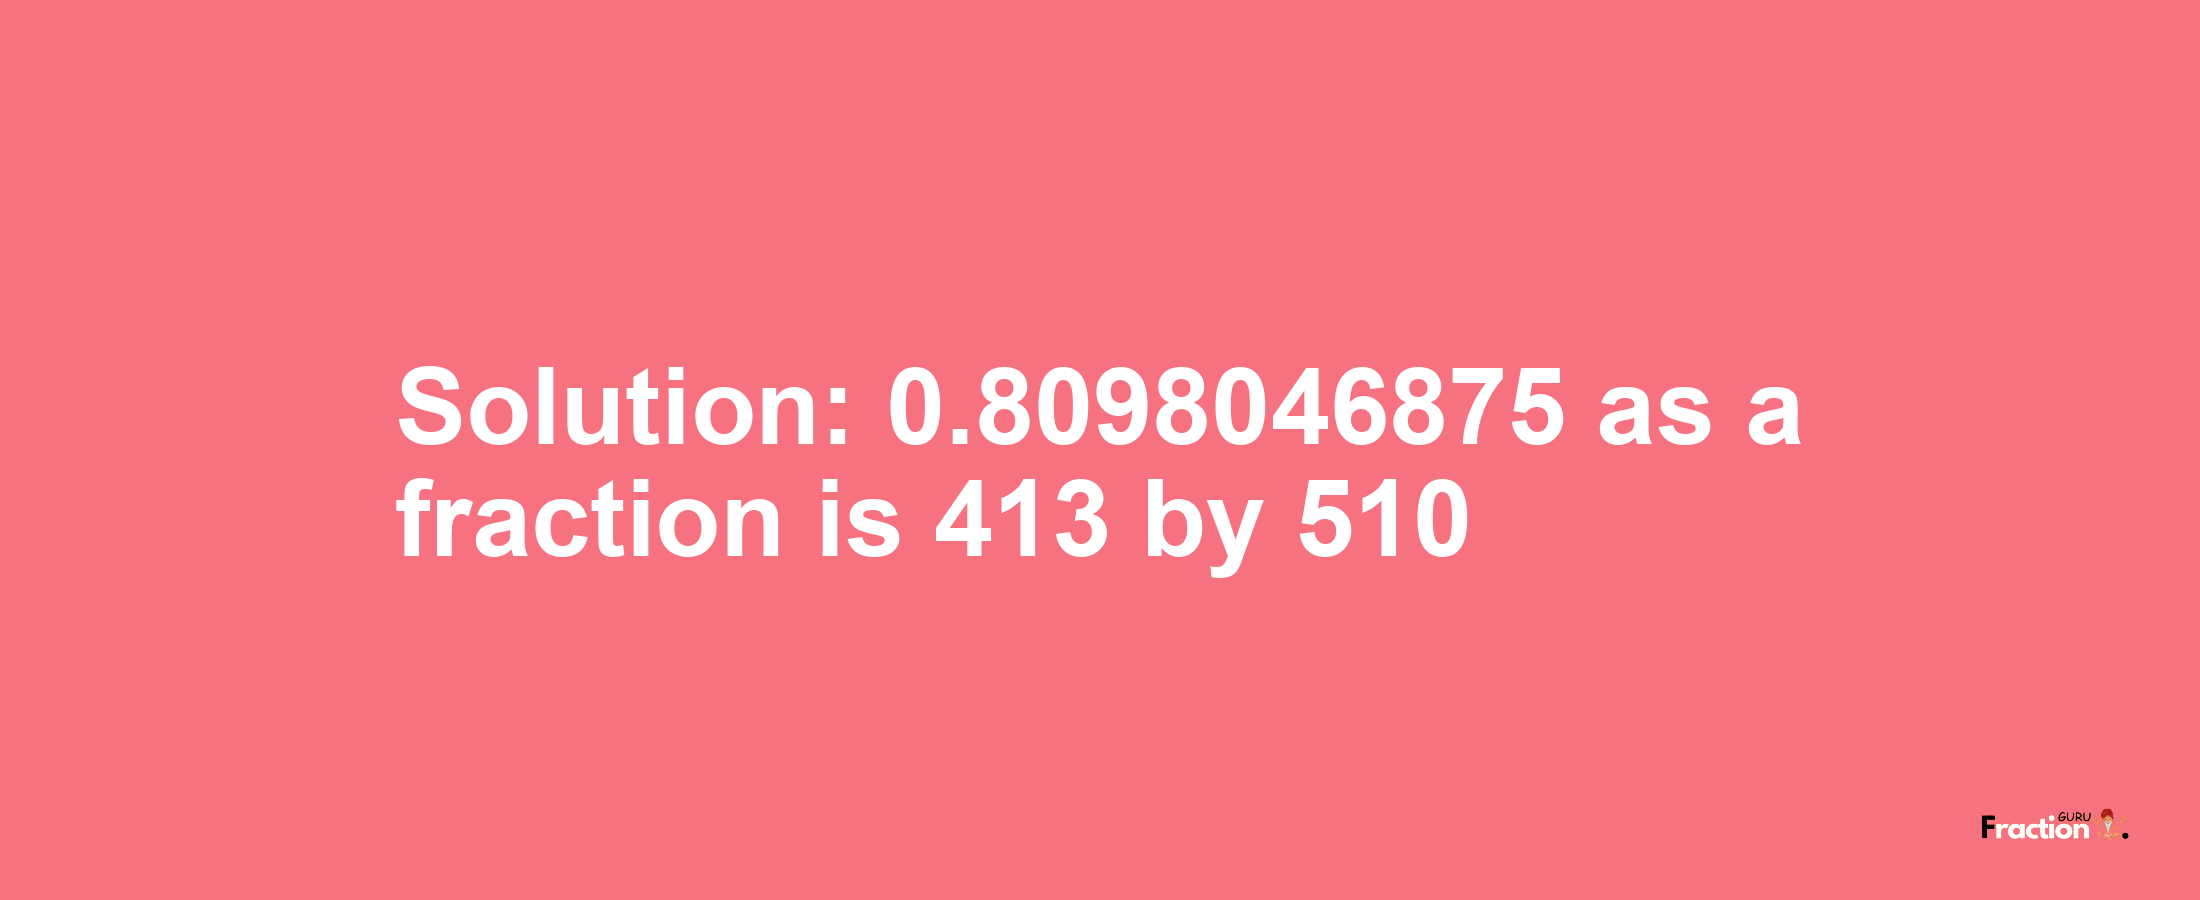 Solution:0.8098046875 as a fraction is 413/510